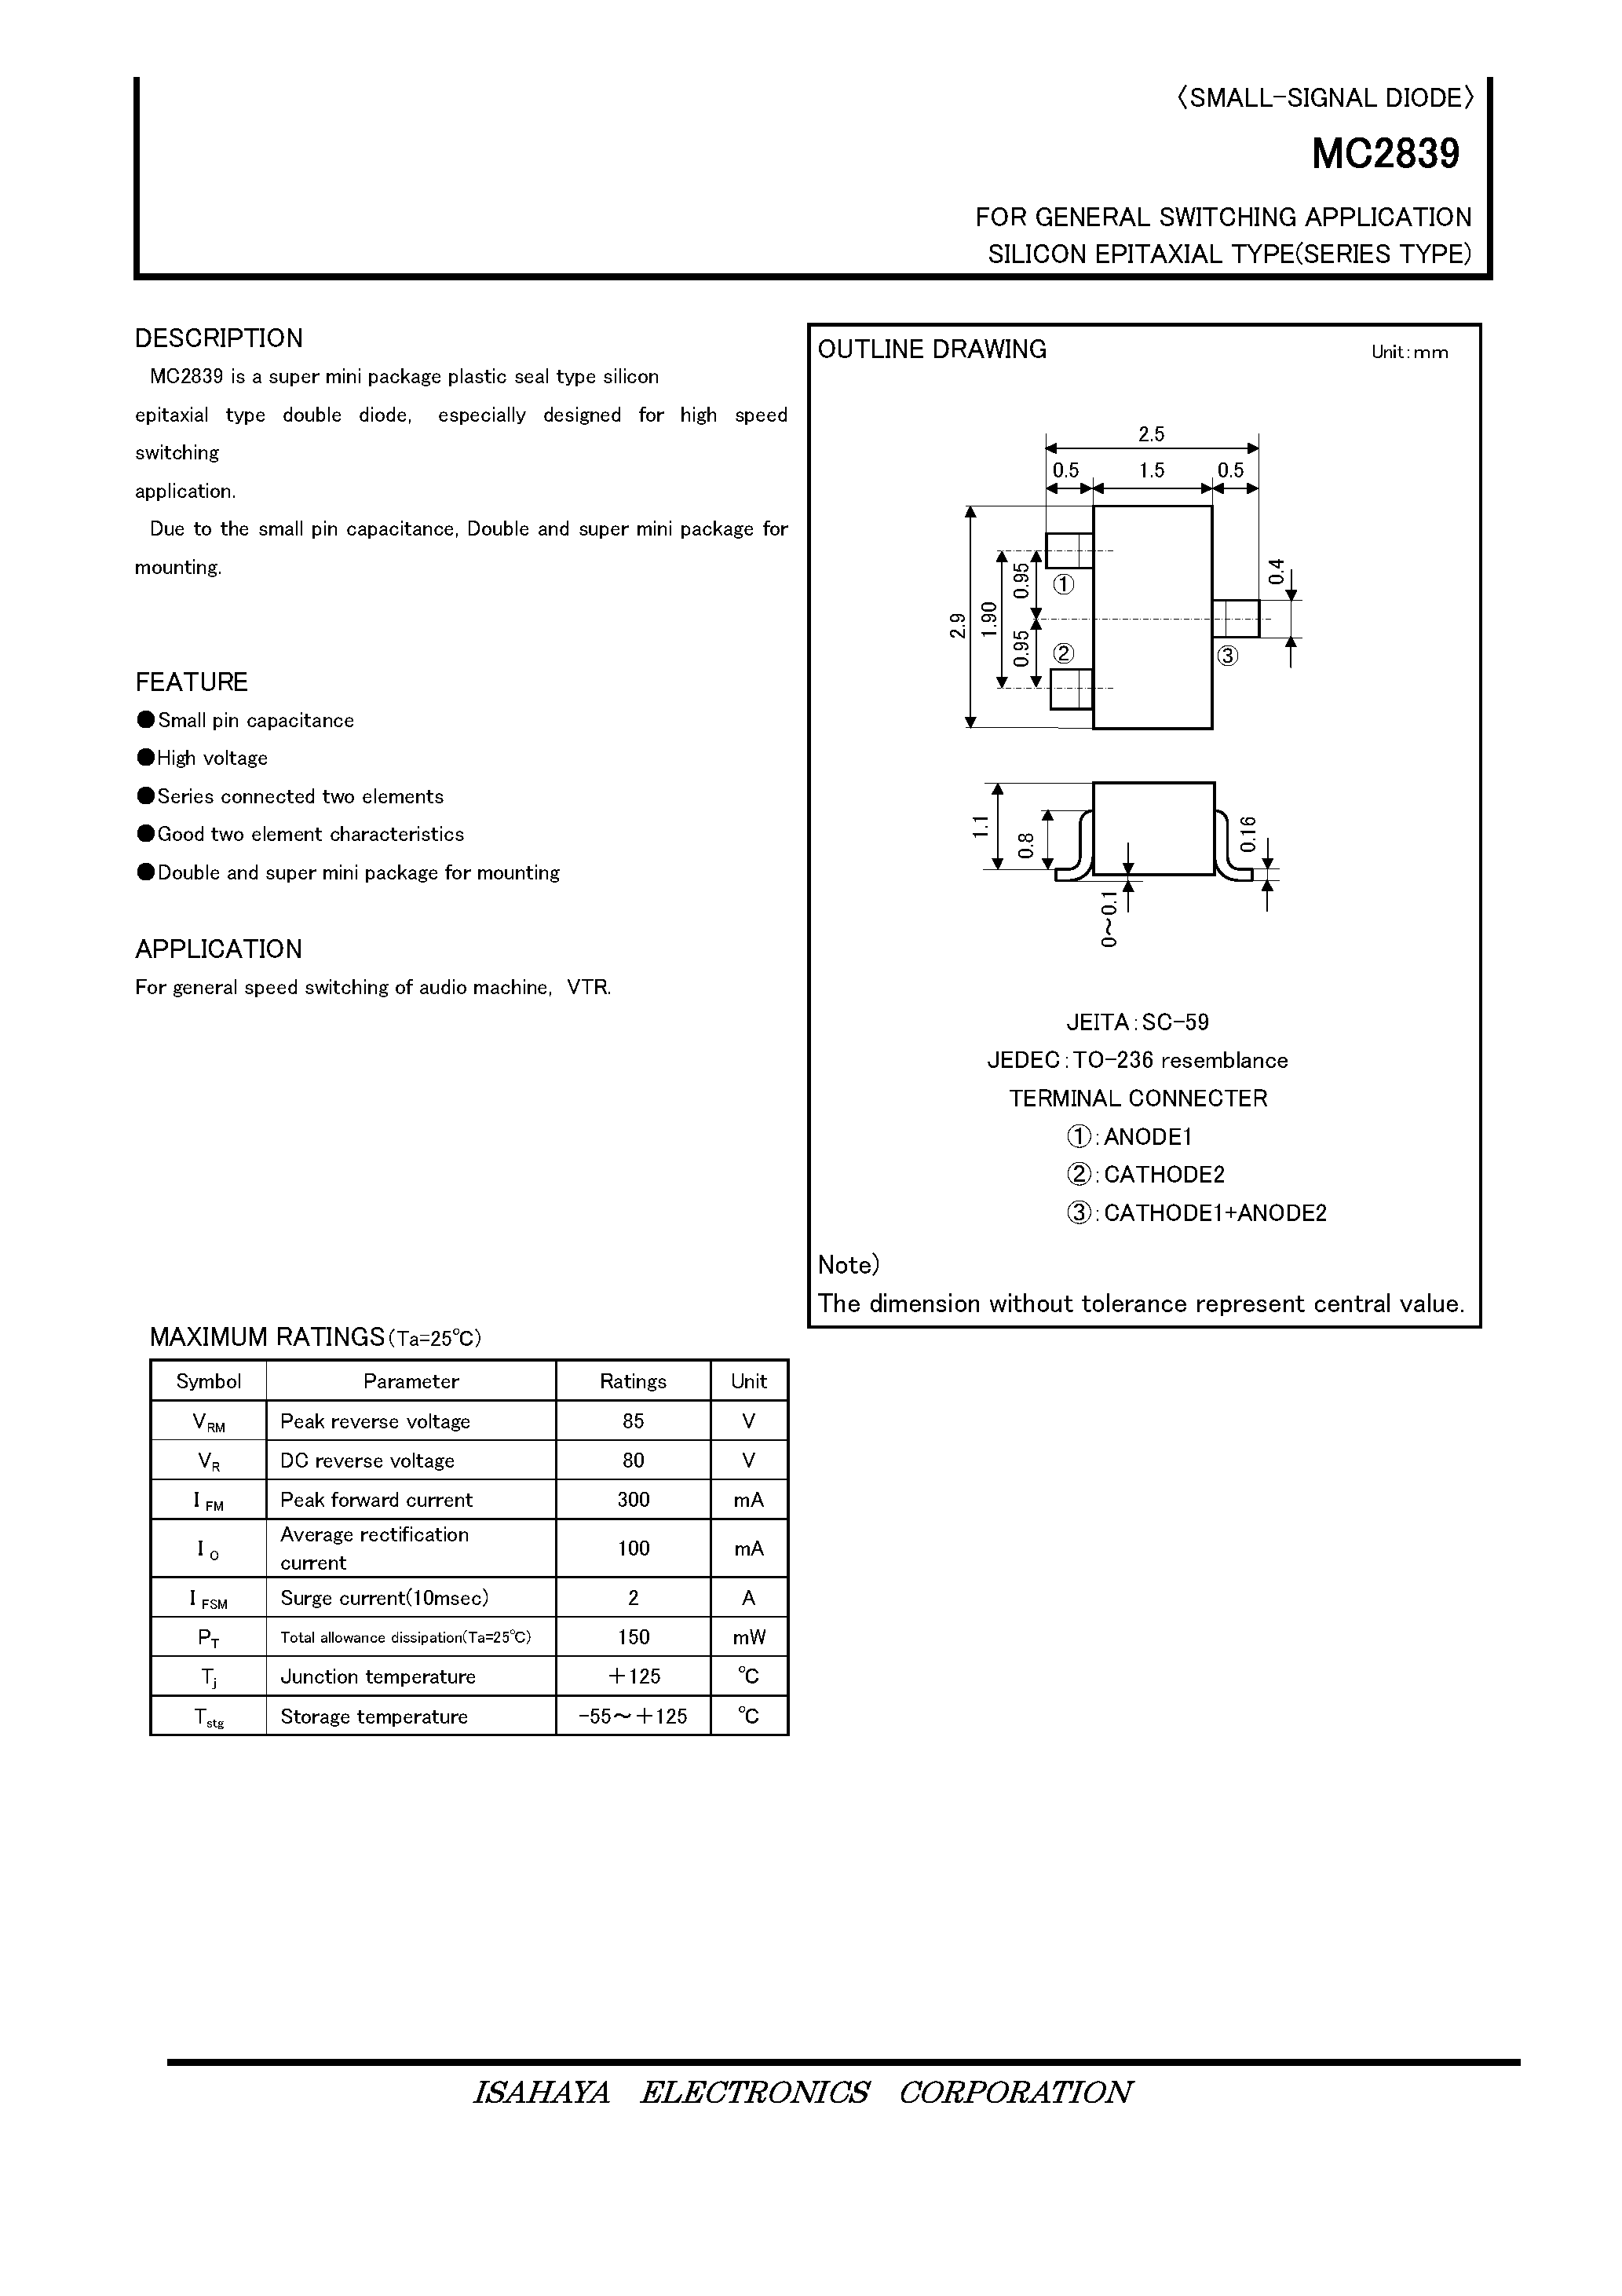 Даташит MC2839 - FOR GENERAL SWITCHING APPLICATION SILICON EPITAXIAL TYPE страница 1